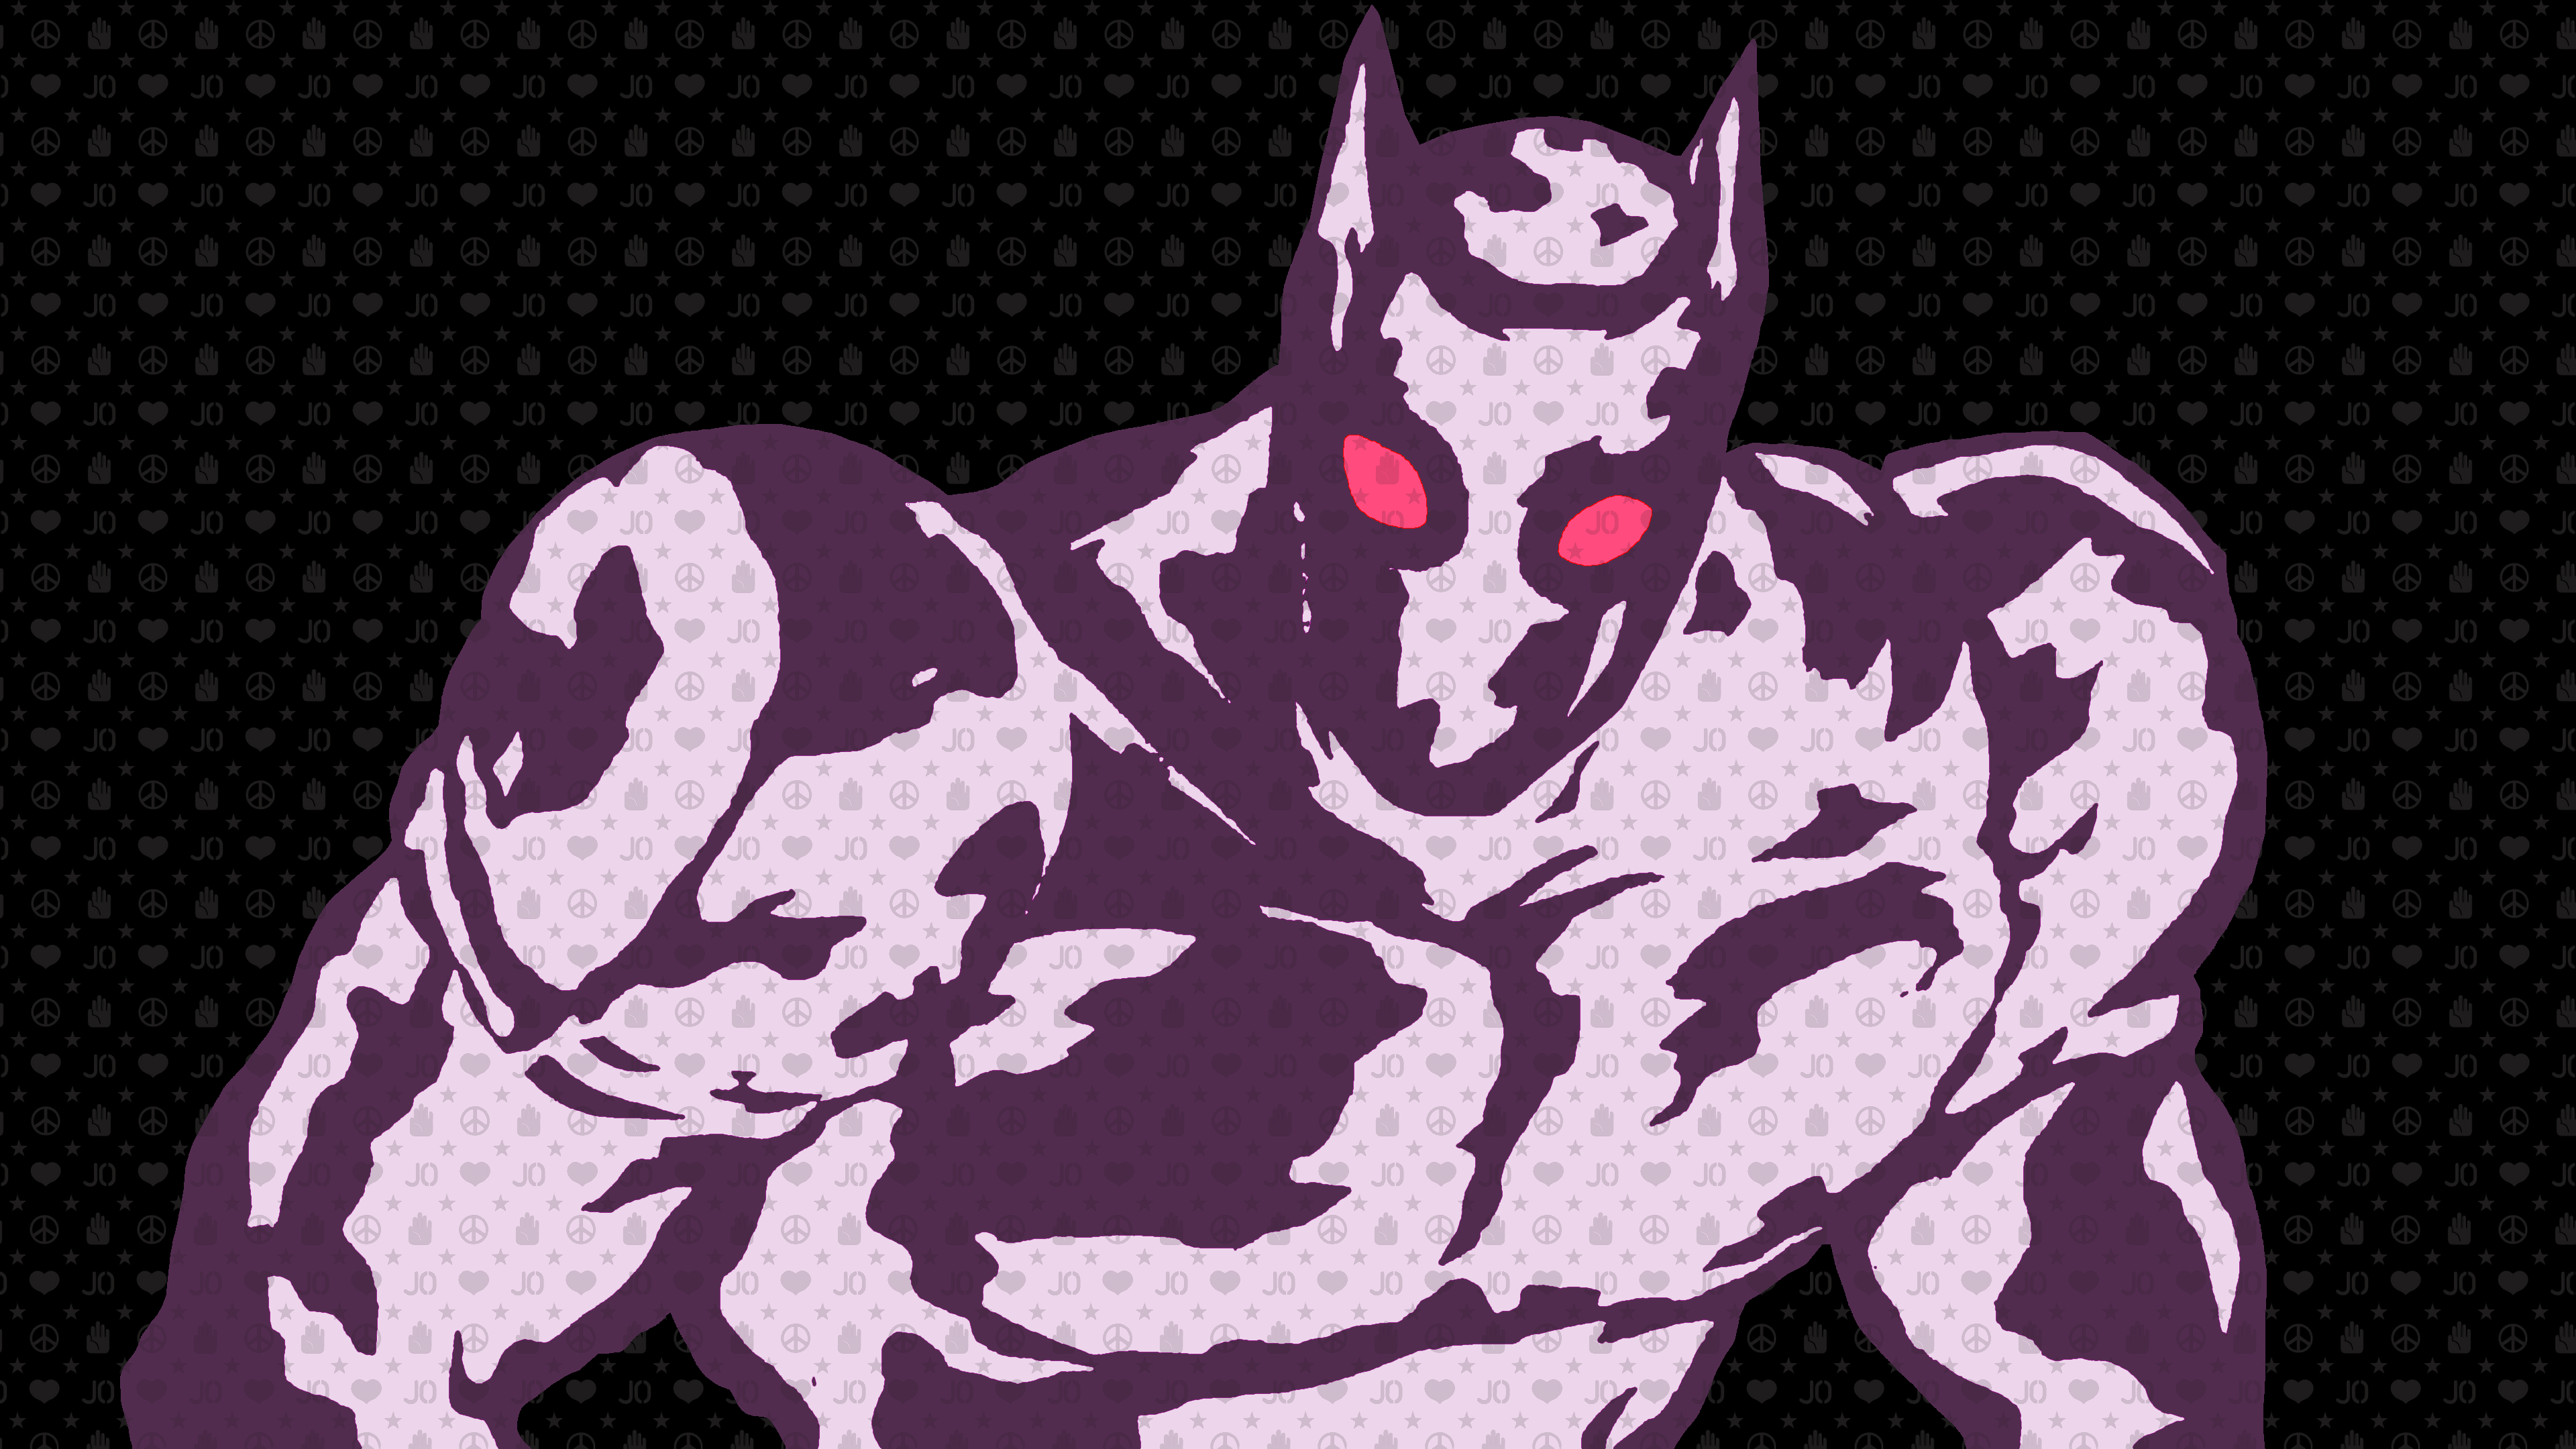 I Made a Killer Queen Wallpaper Based on His Silhouette